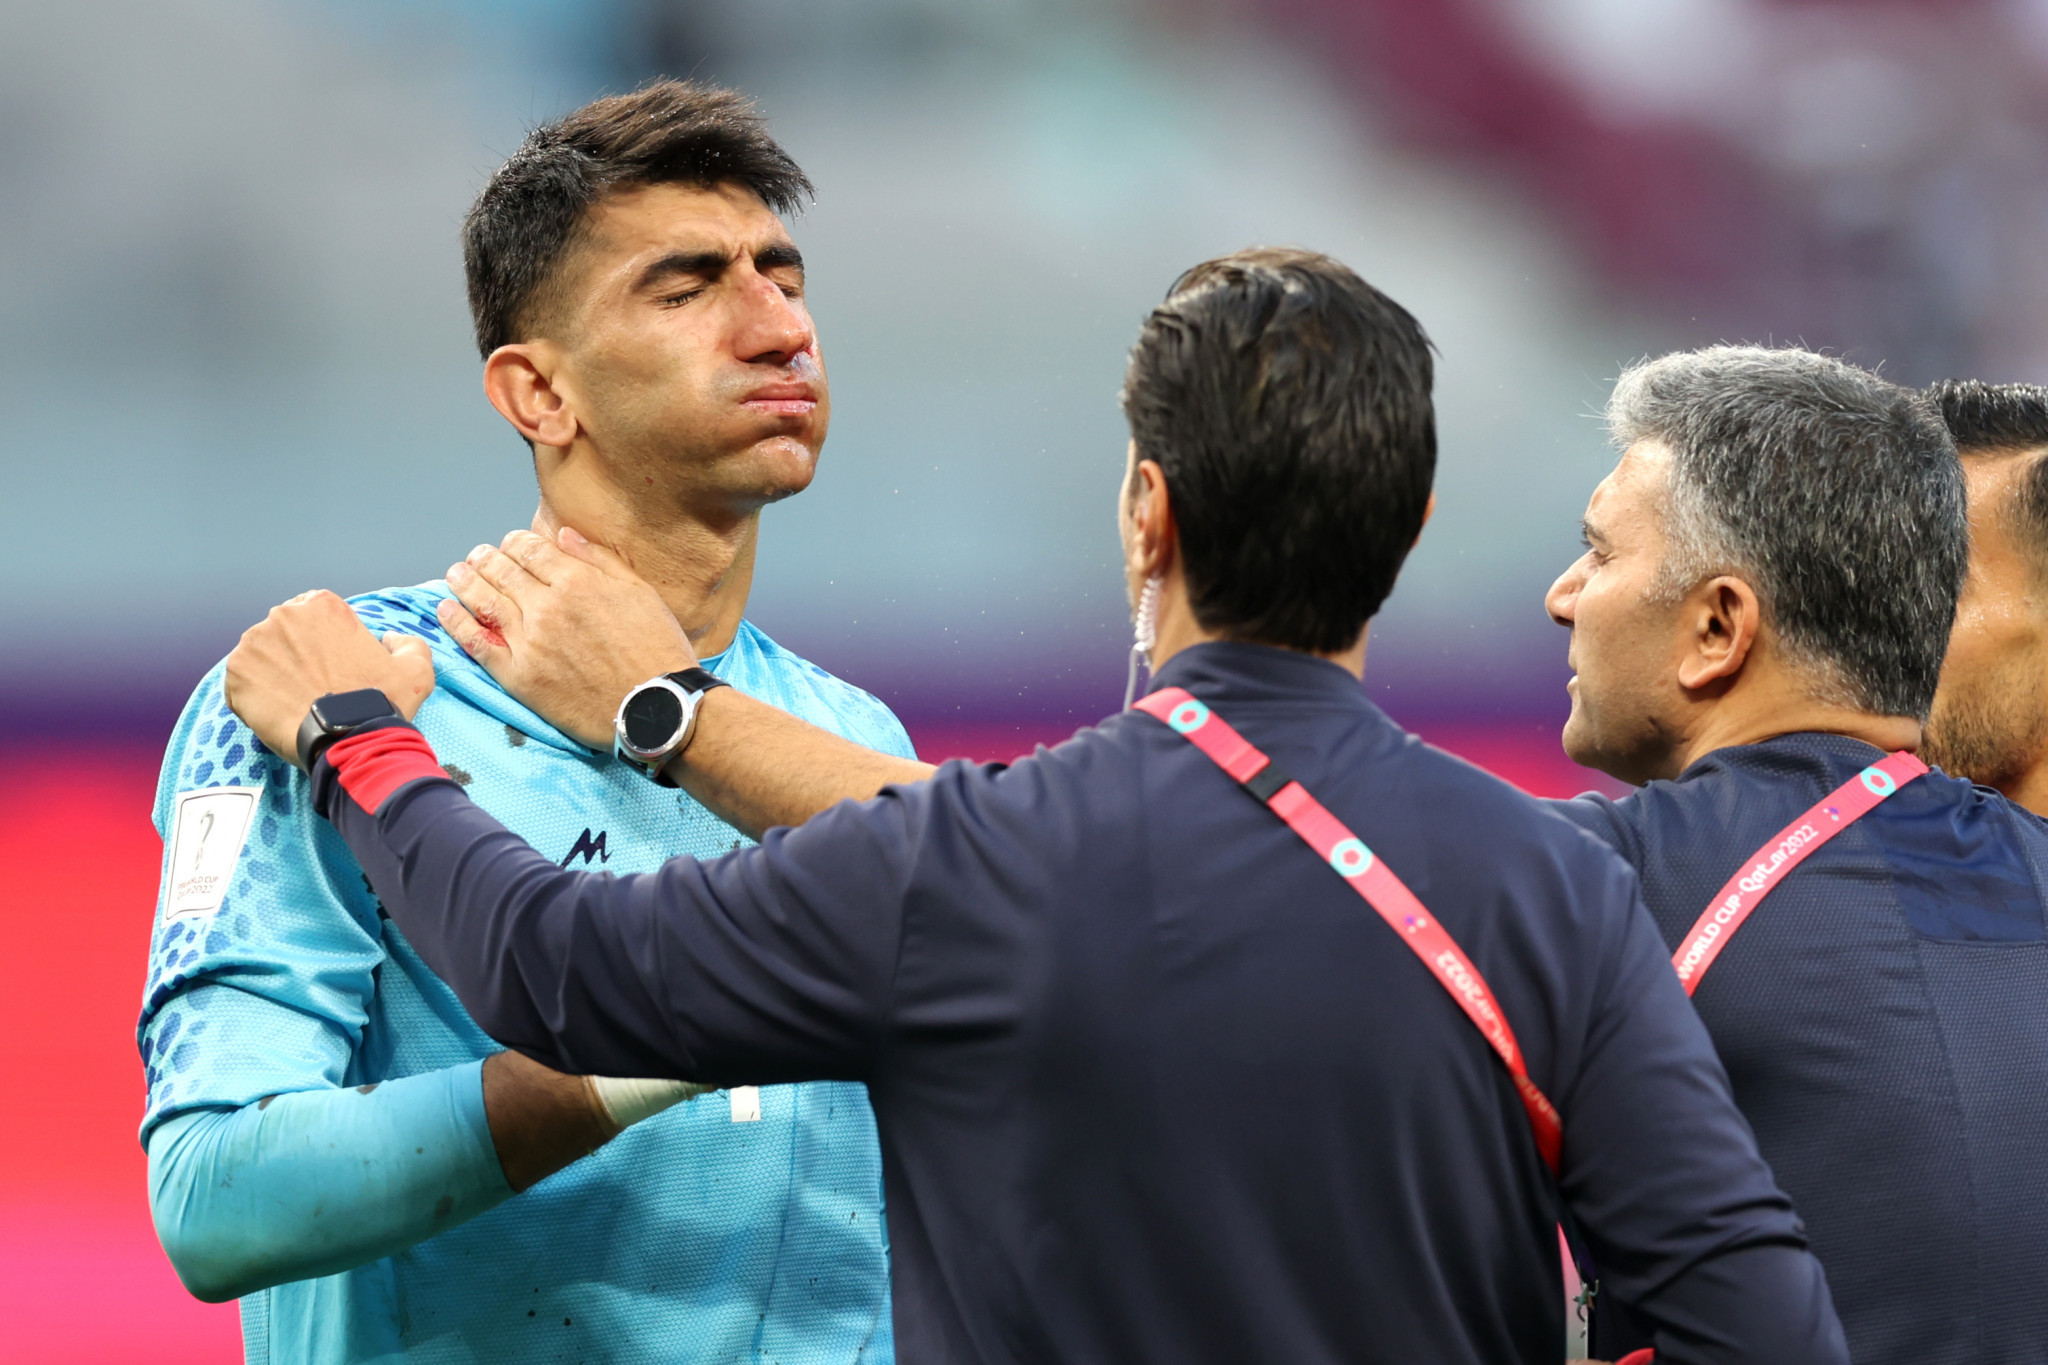 Iranian goalkeeper Alireza Beiranvand was initially allowed to continue in a World Cup match despite appearing visibly dazed, and IFAB stressed the need for an 